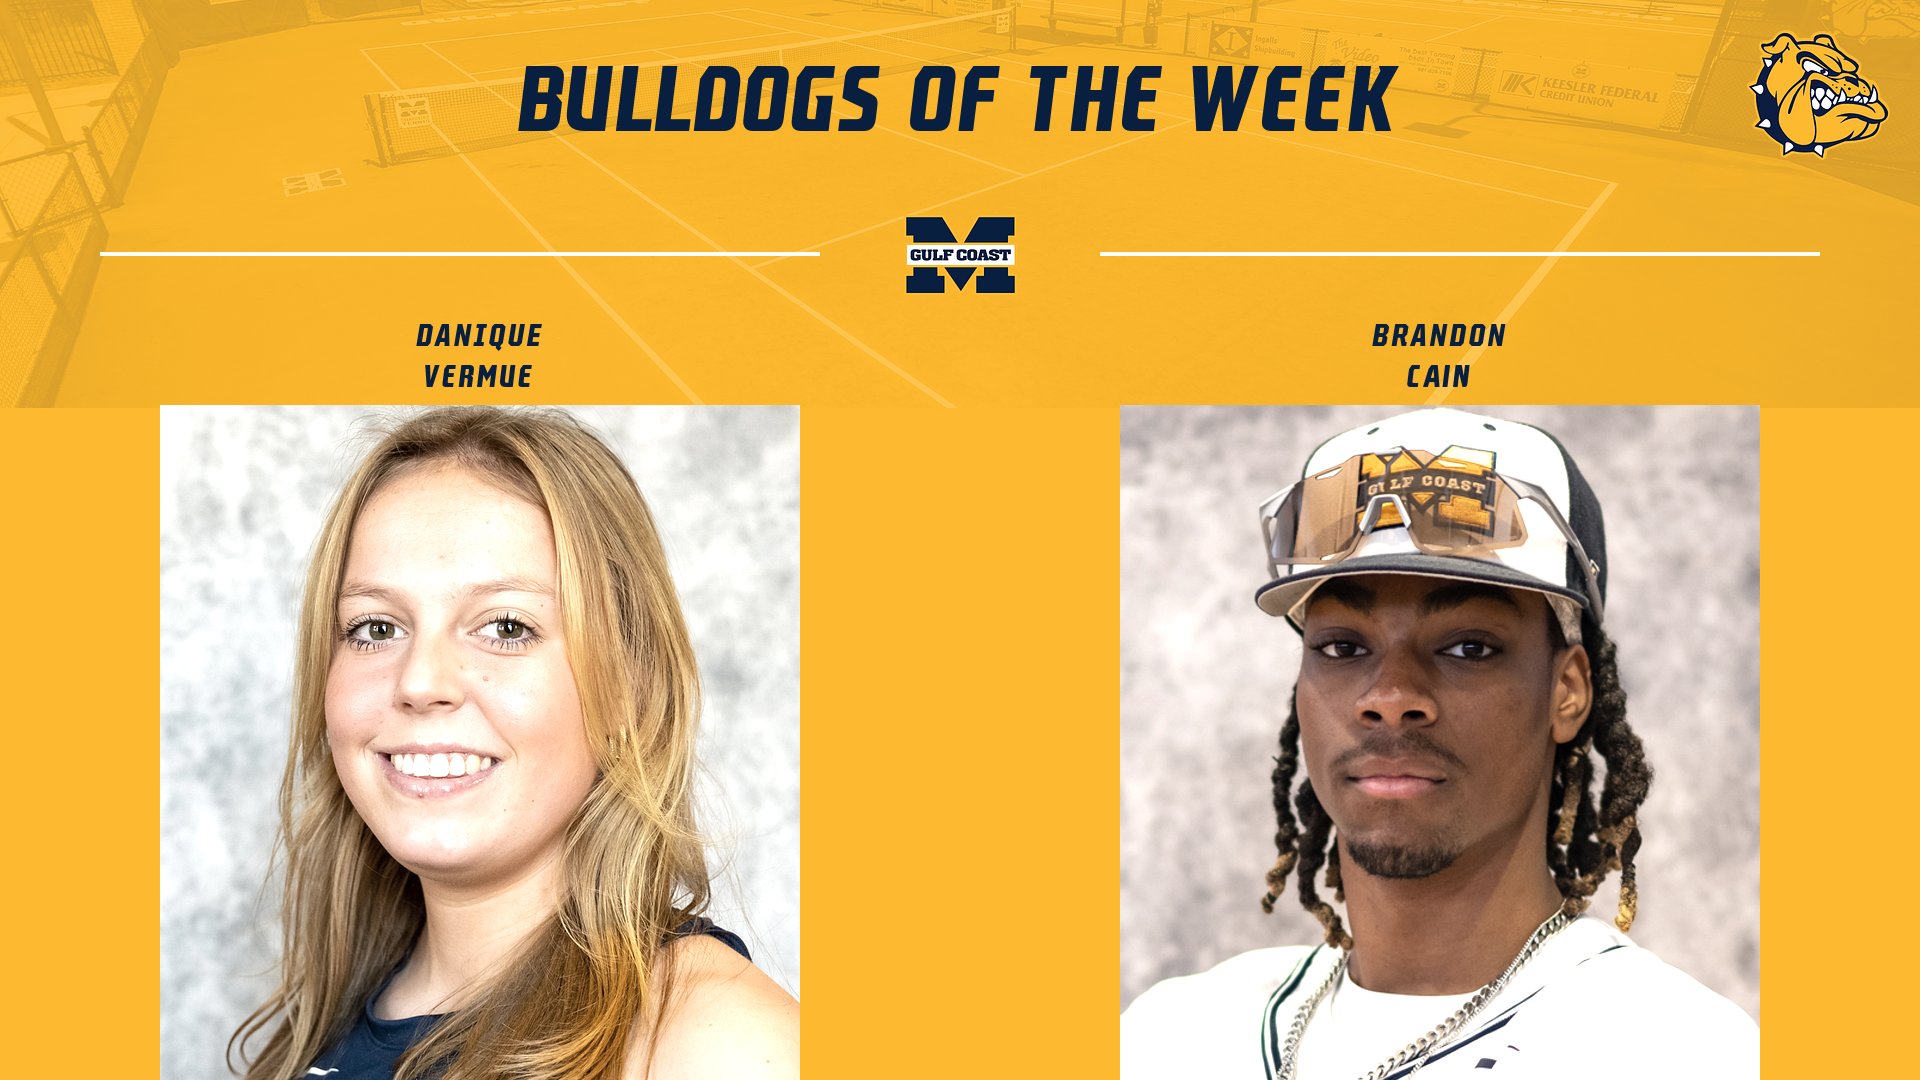 Vermue, Cain named Bulldogs of the Week